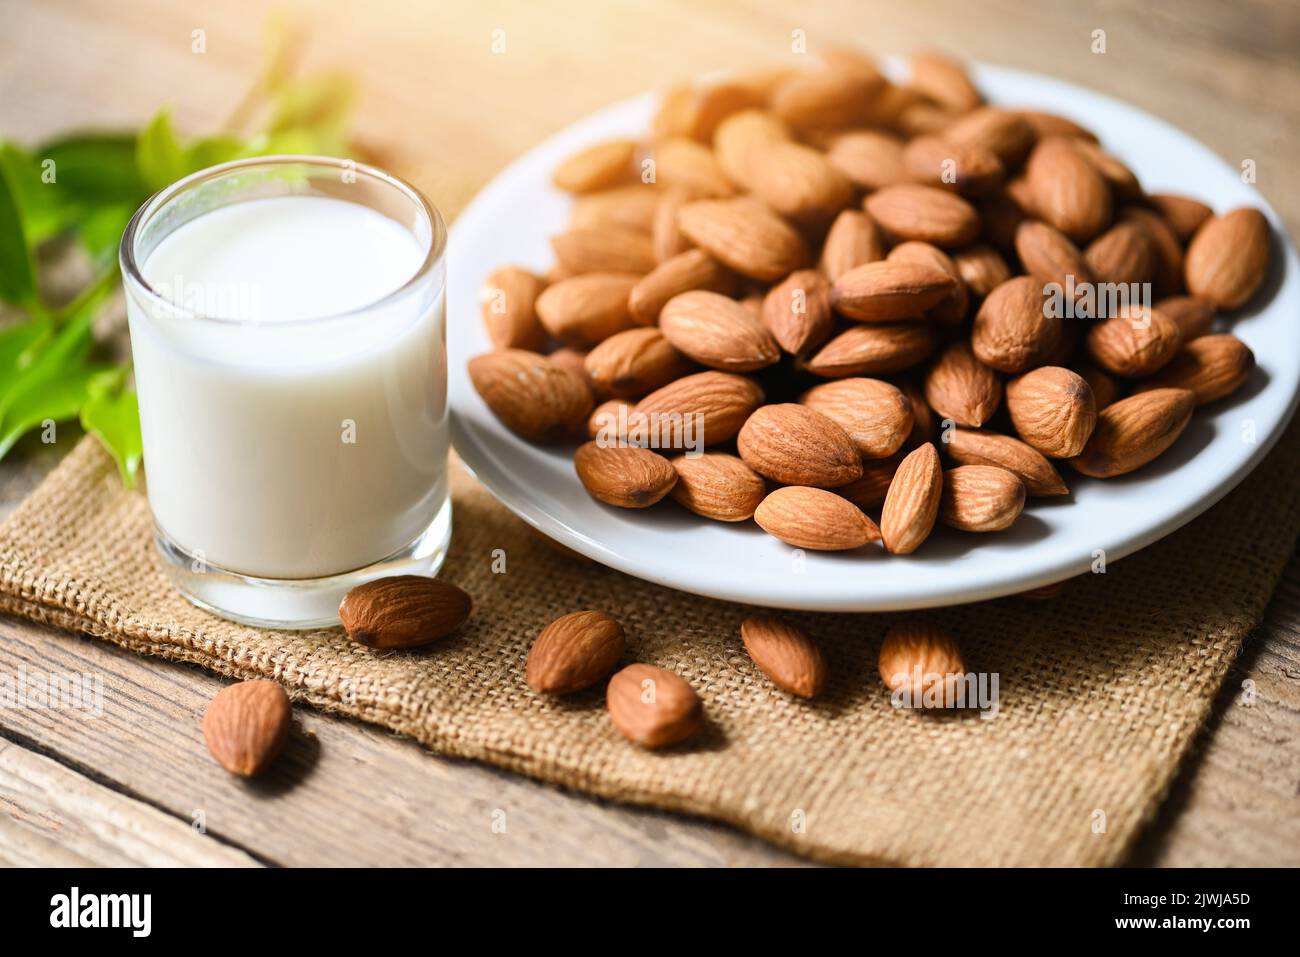 Almond milk and Almonds nuts on white plate background, Delicious sweet almonds on wooden table, roasted almond nut for healthy food and snack Stock Photo